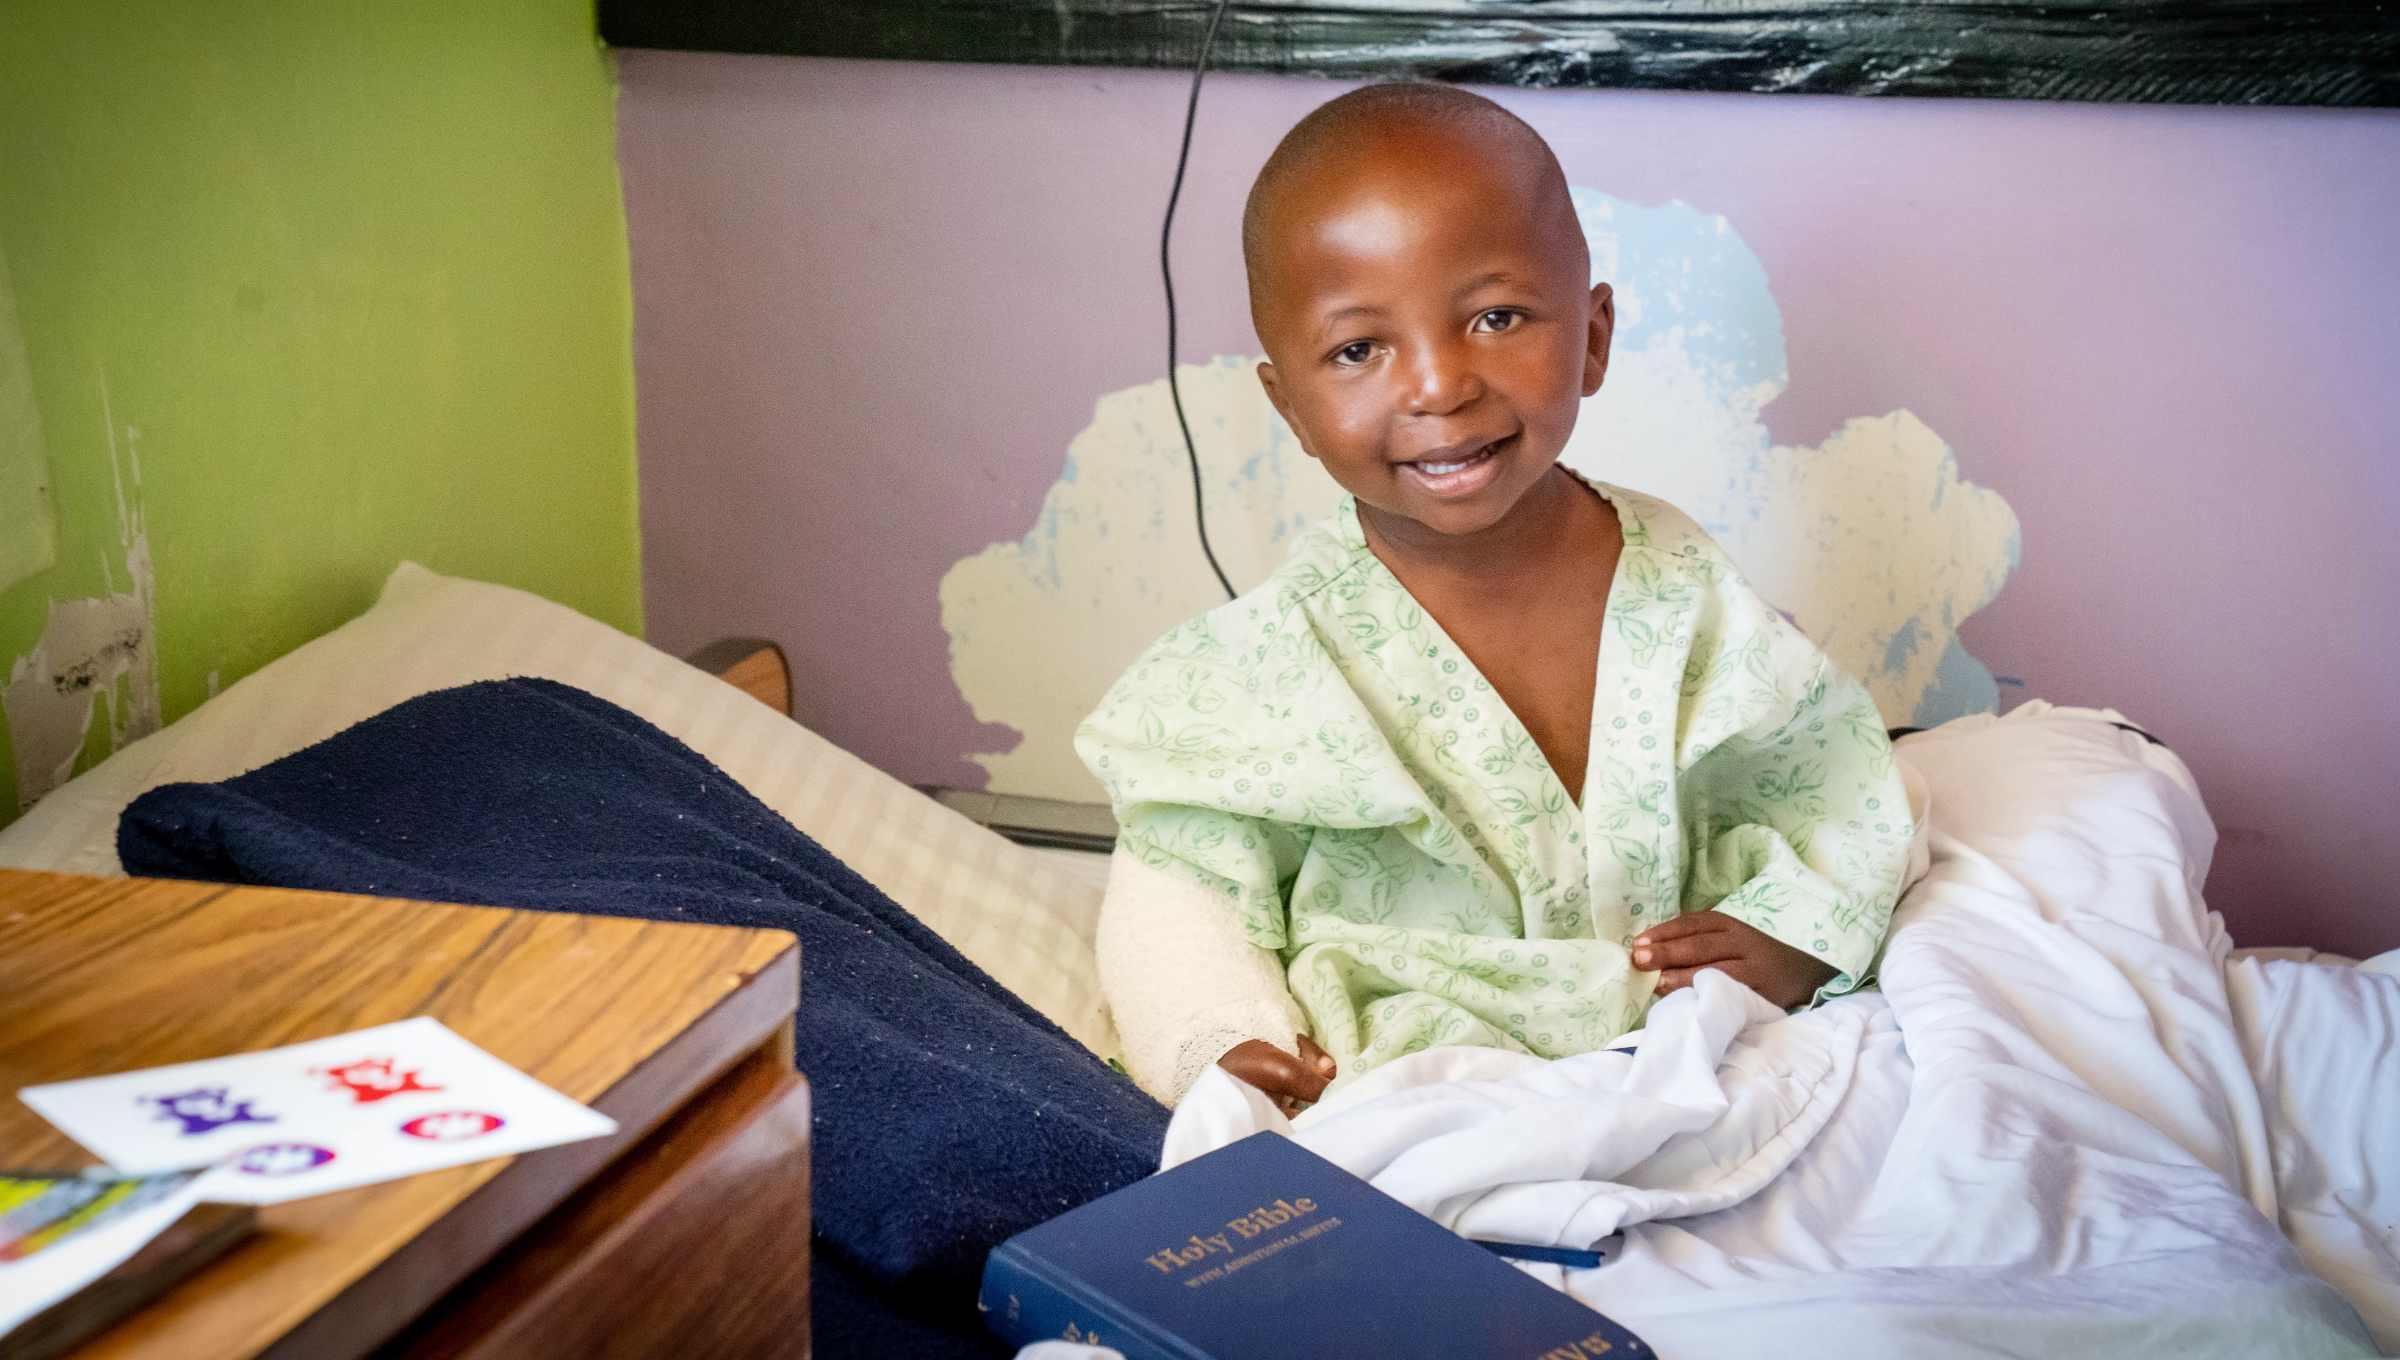 Smiling child patient after surgery